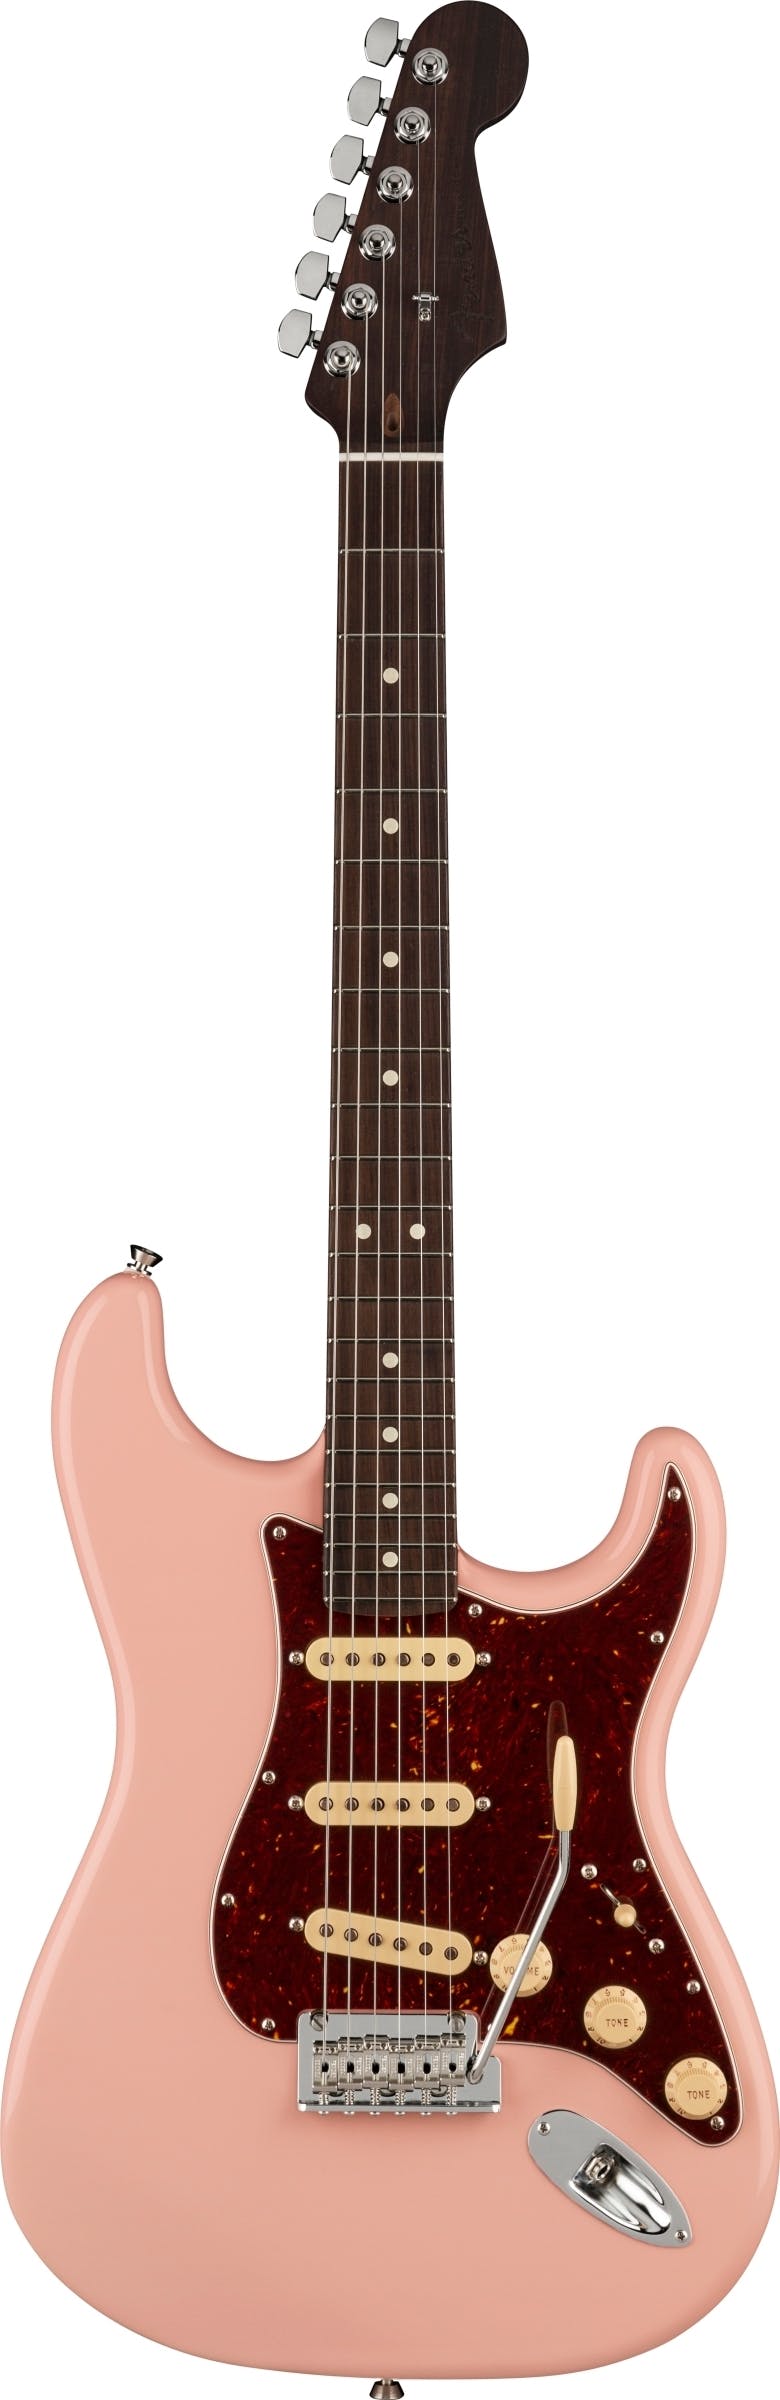 Fender Fender Limited Edition American Professional II Stratocaster Shell Pink, Rosewood Neck 011-3900-756 Buy on Feesheh